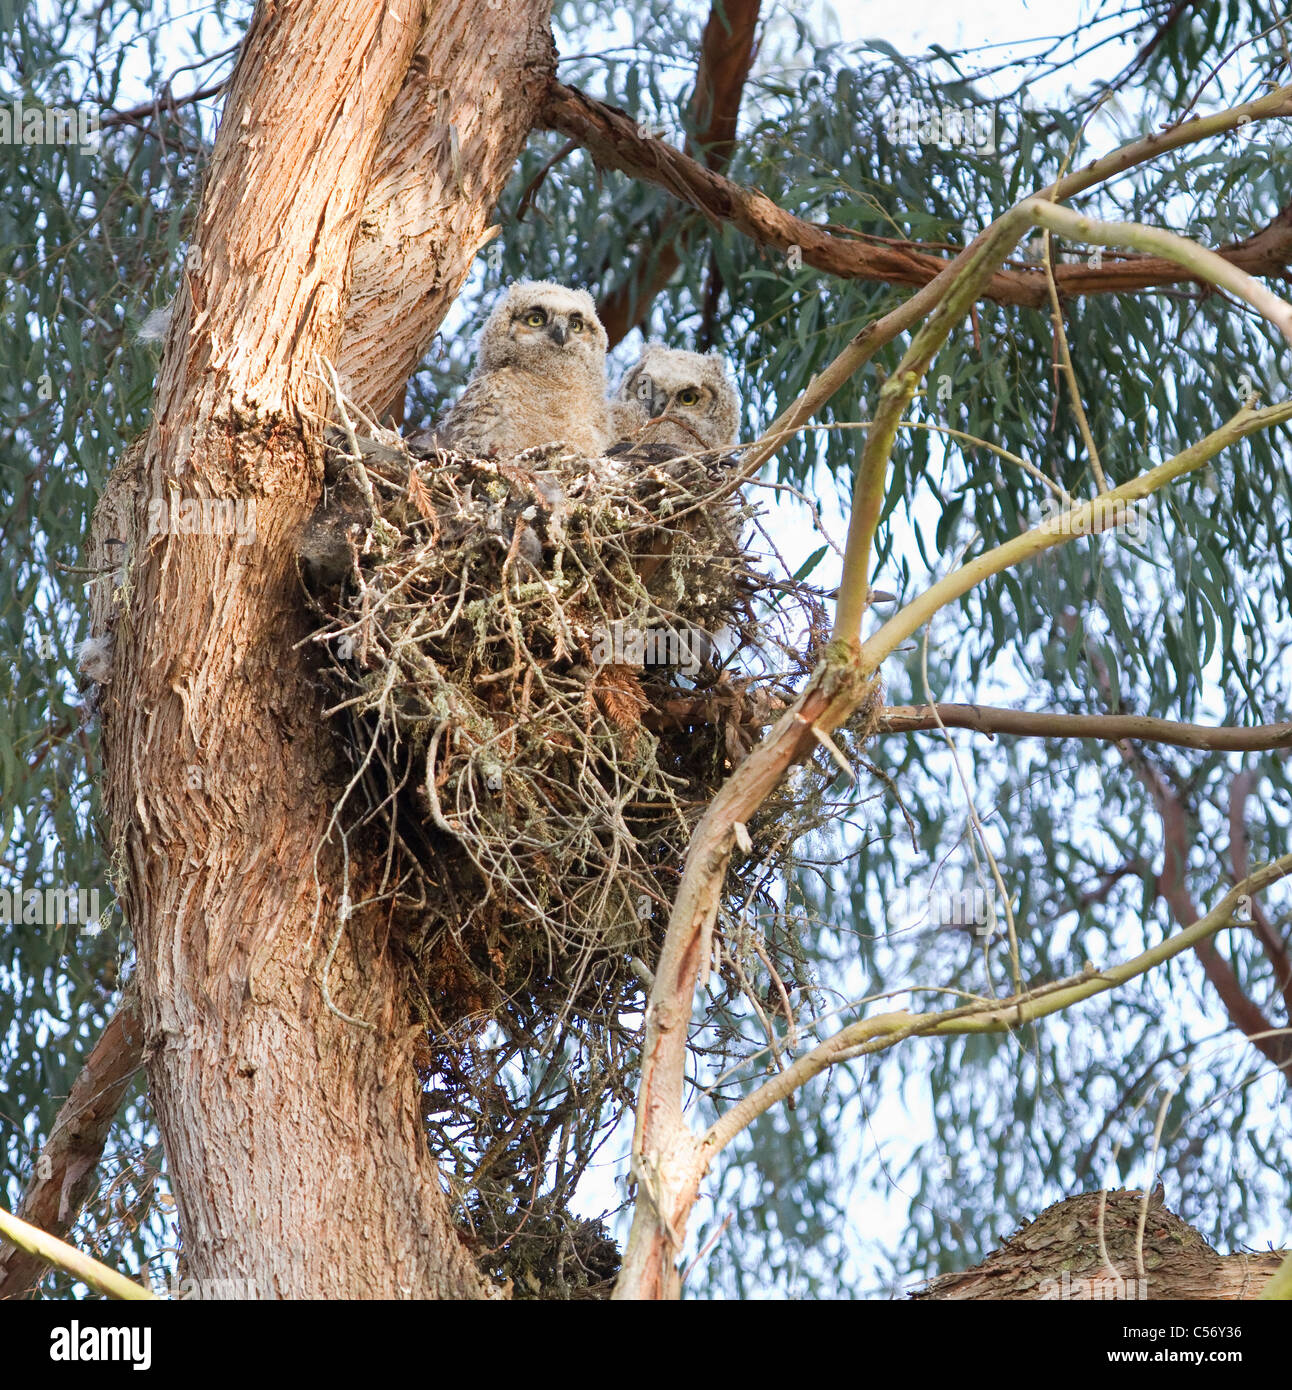 Pair of Great Horned Owlets in a nest at Spring Lake, Santa Rosa, California, USA. Stock Photo